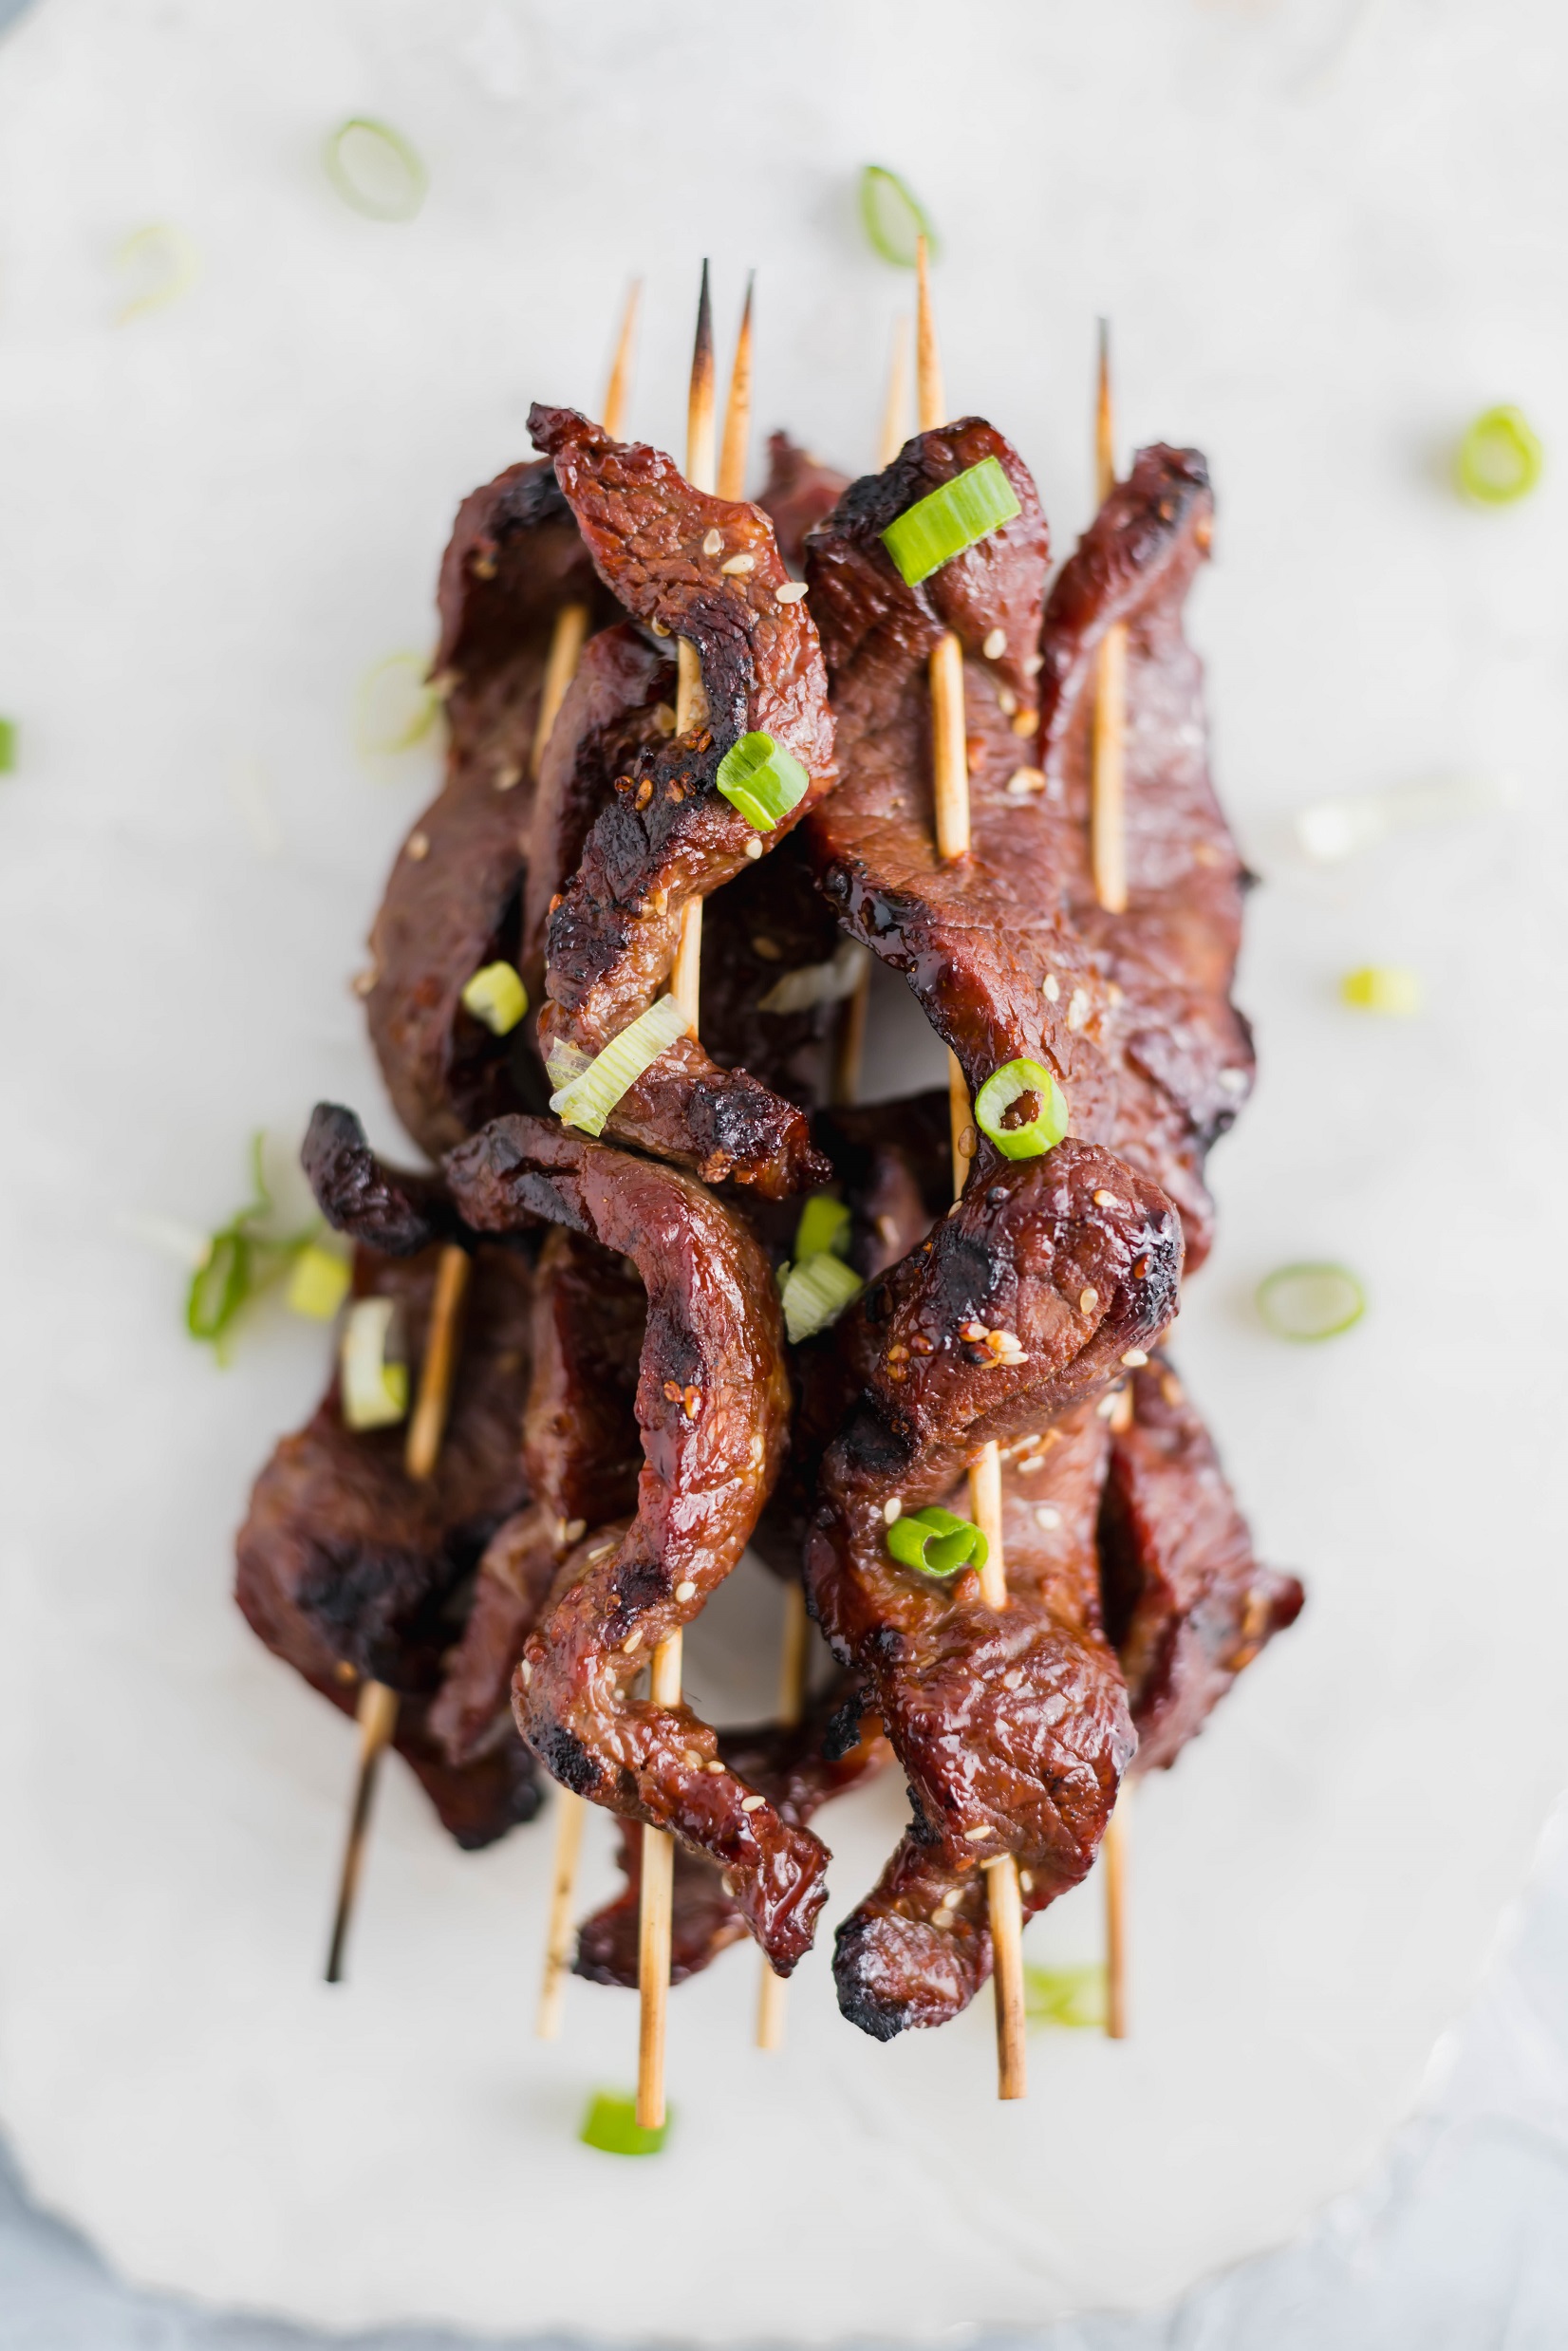 Thinly sliced flank steak in a delicious Asian marinade and threaded onto skewers make up these delicious Grilled Steak Kabobs. Sure to be a summertime favorite.